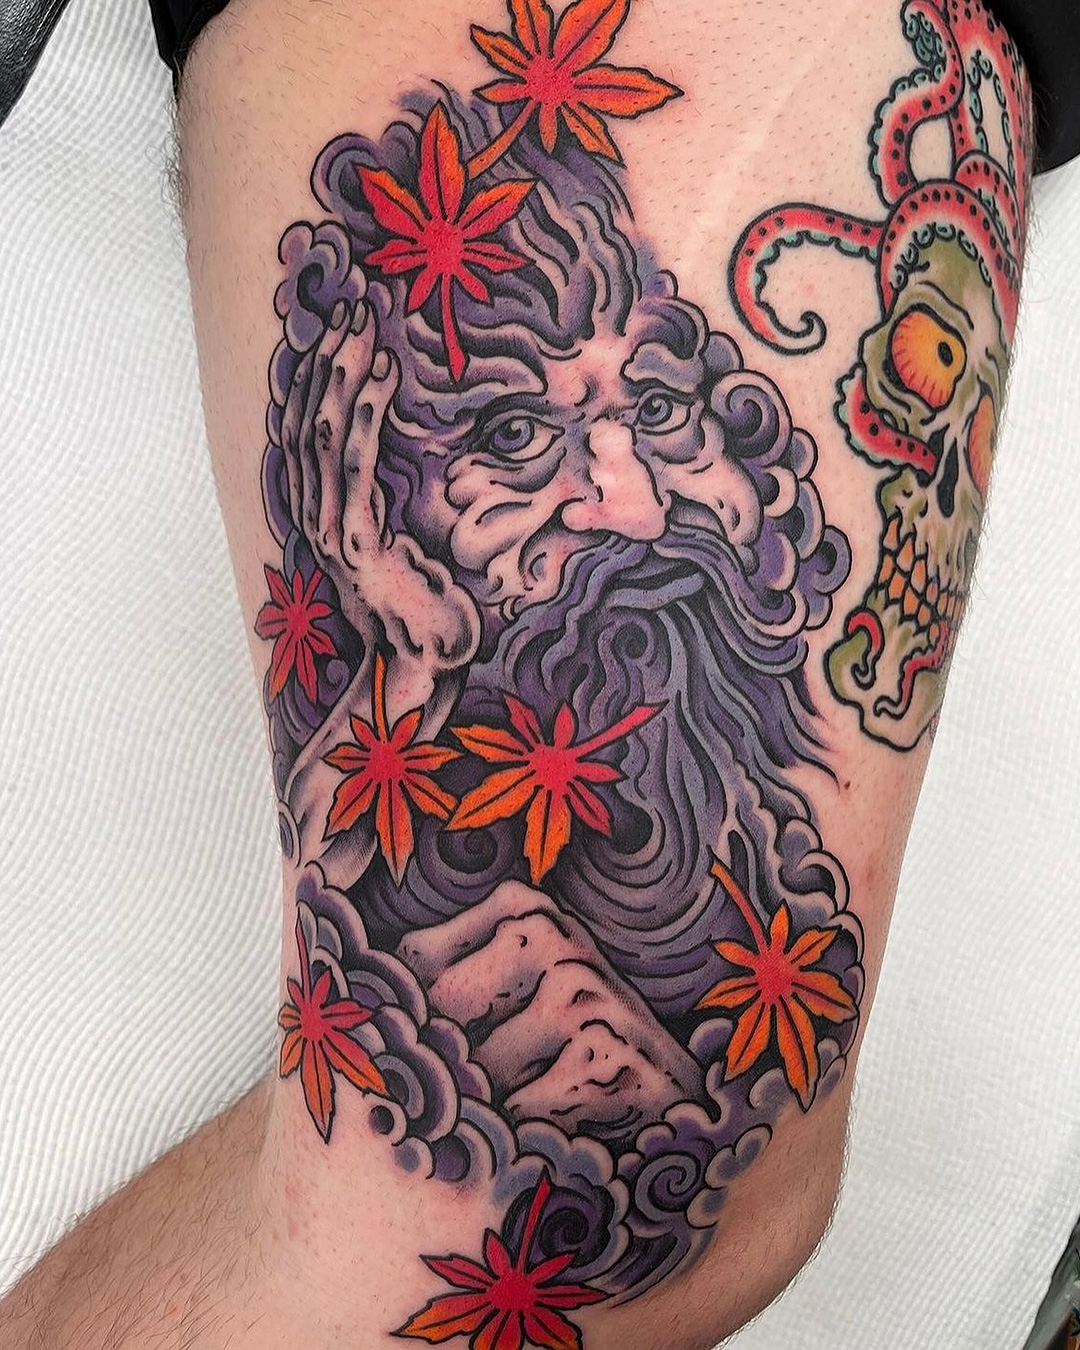 Someone with a colourful man with a beard on their leg.